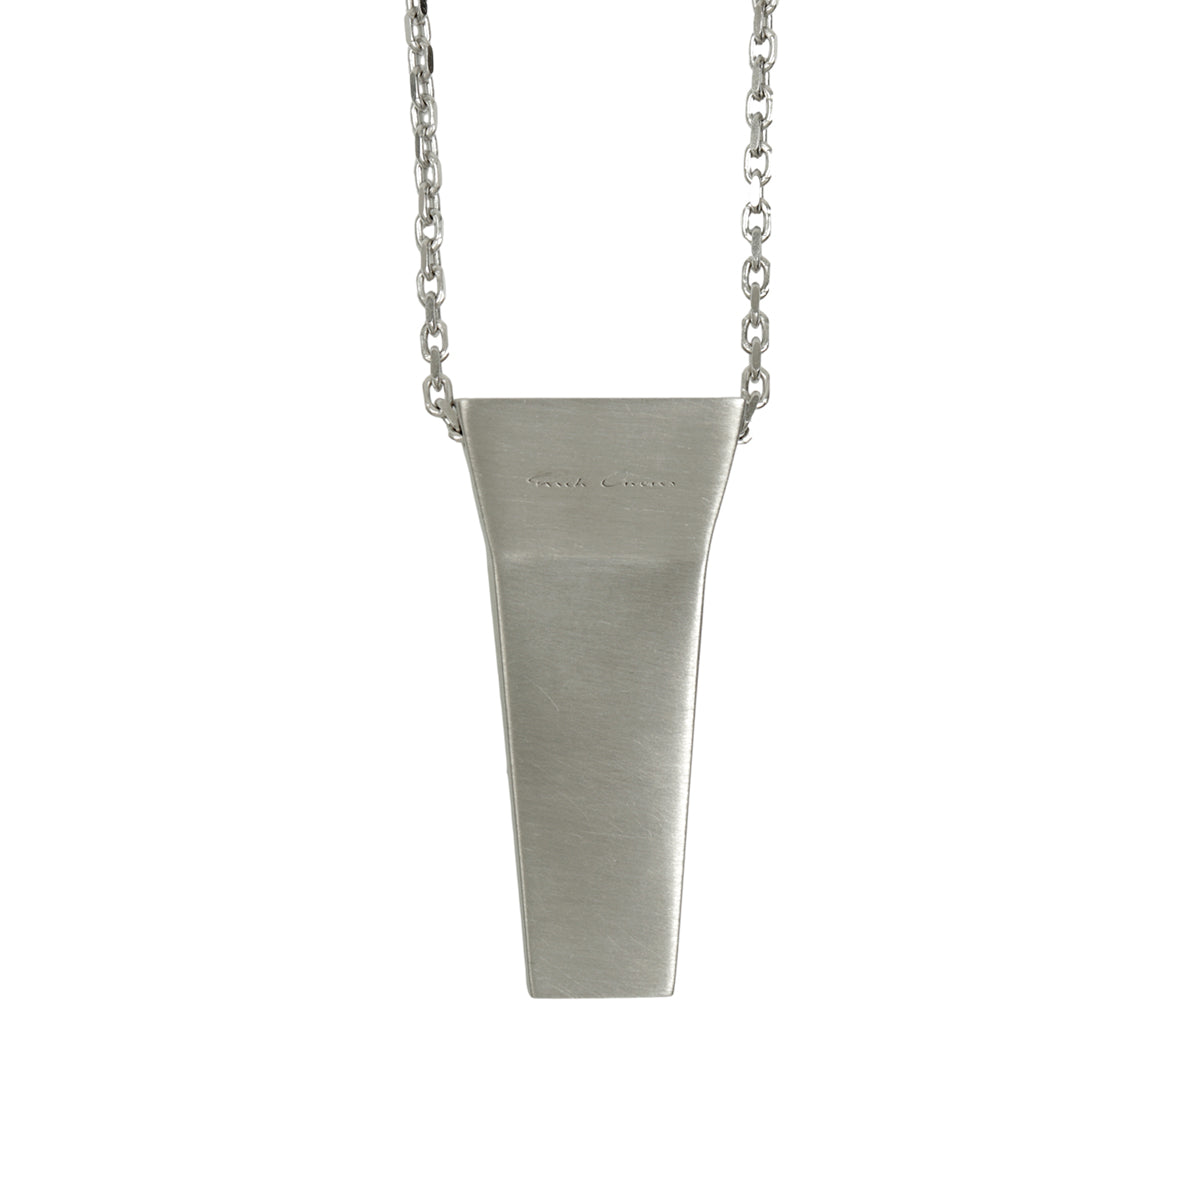 RICK OWENS (リック・オウエンス) - TRUNK CHARM NECKLACE ネックレス 